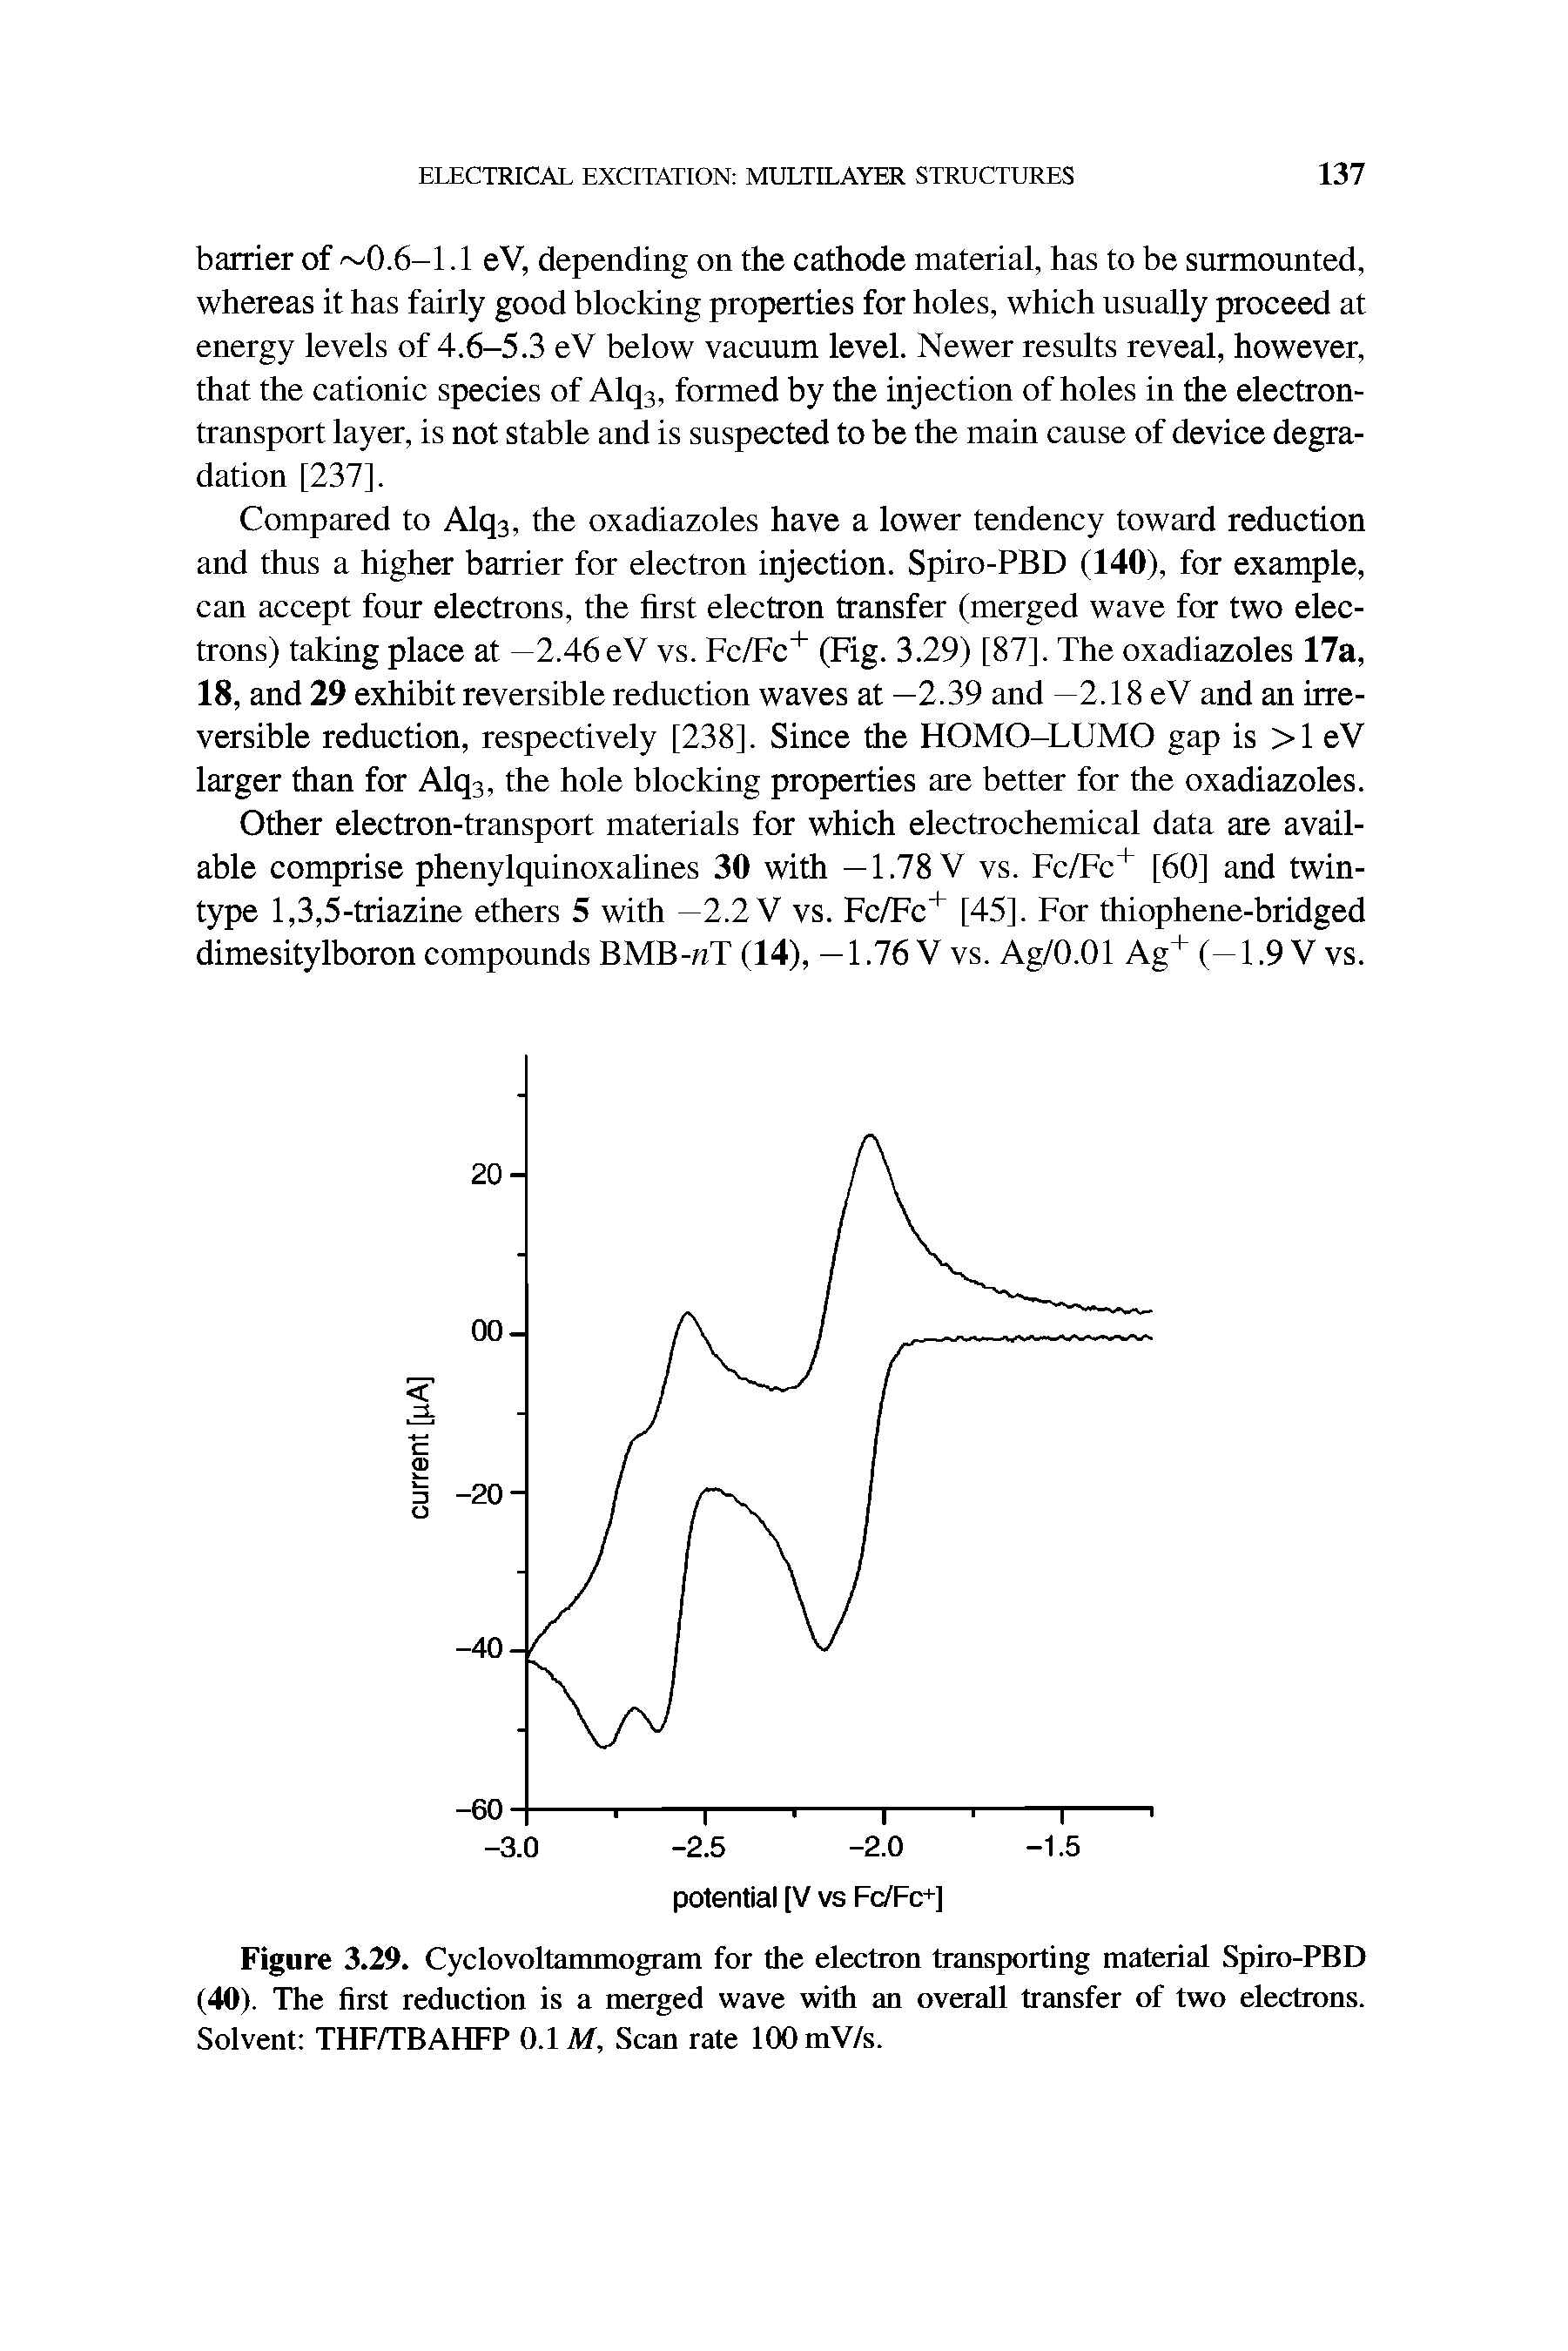 Figure 3.29. Cyclovoltammogram for the electron transporting material Spiro-PBD (40). The first reduction is a merged wave with an overall transfer of two electrons. Solvent THF/TBAHFP 0.1 M, Scan rate lOOmV/s.